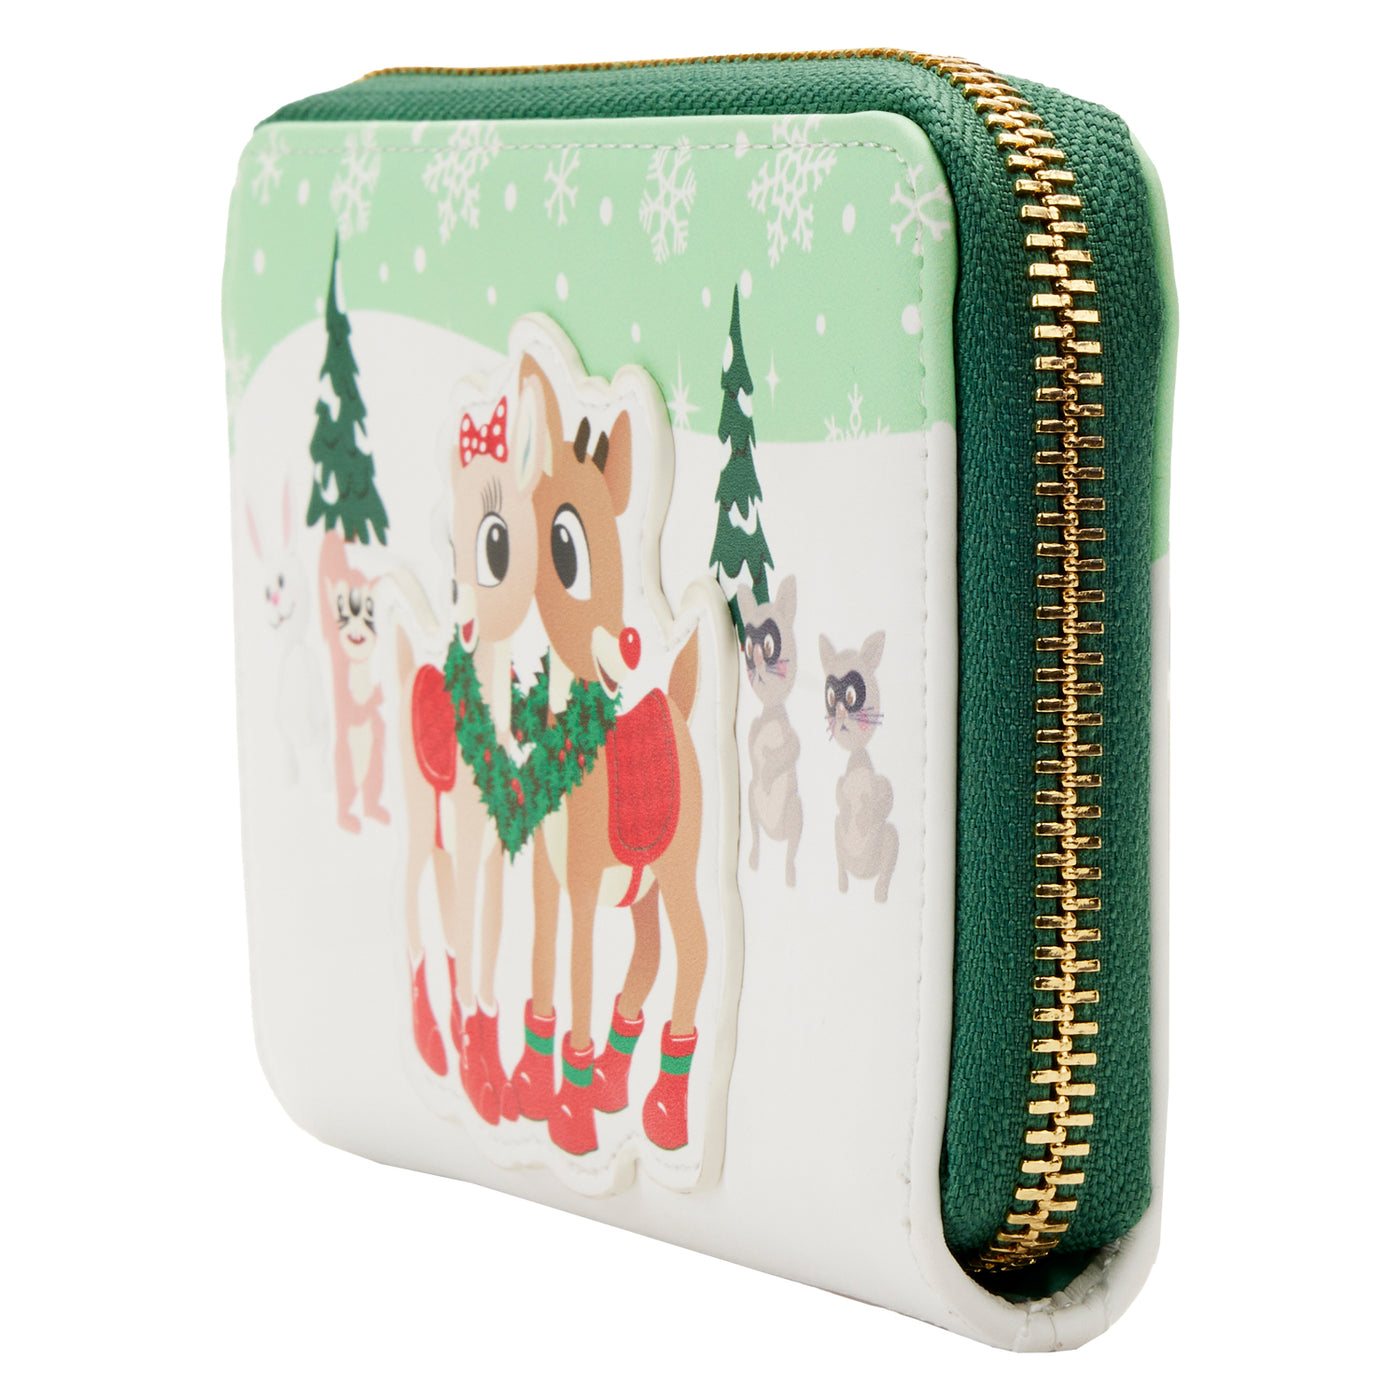 Rudolph The Red-Nose Reindeer Merry Couple Wallet